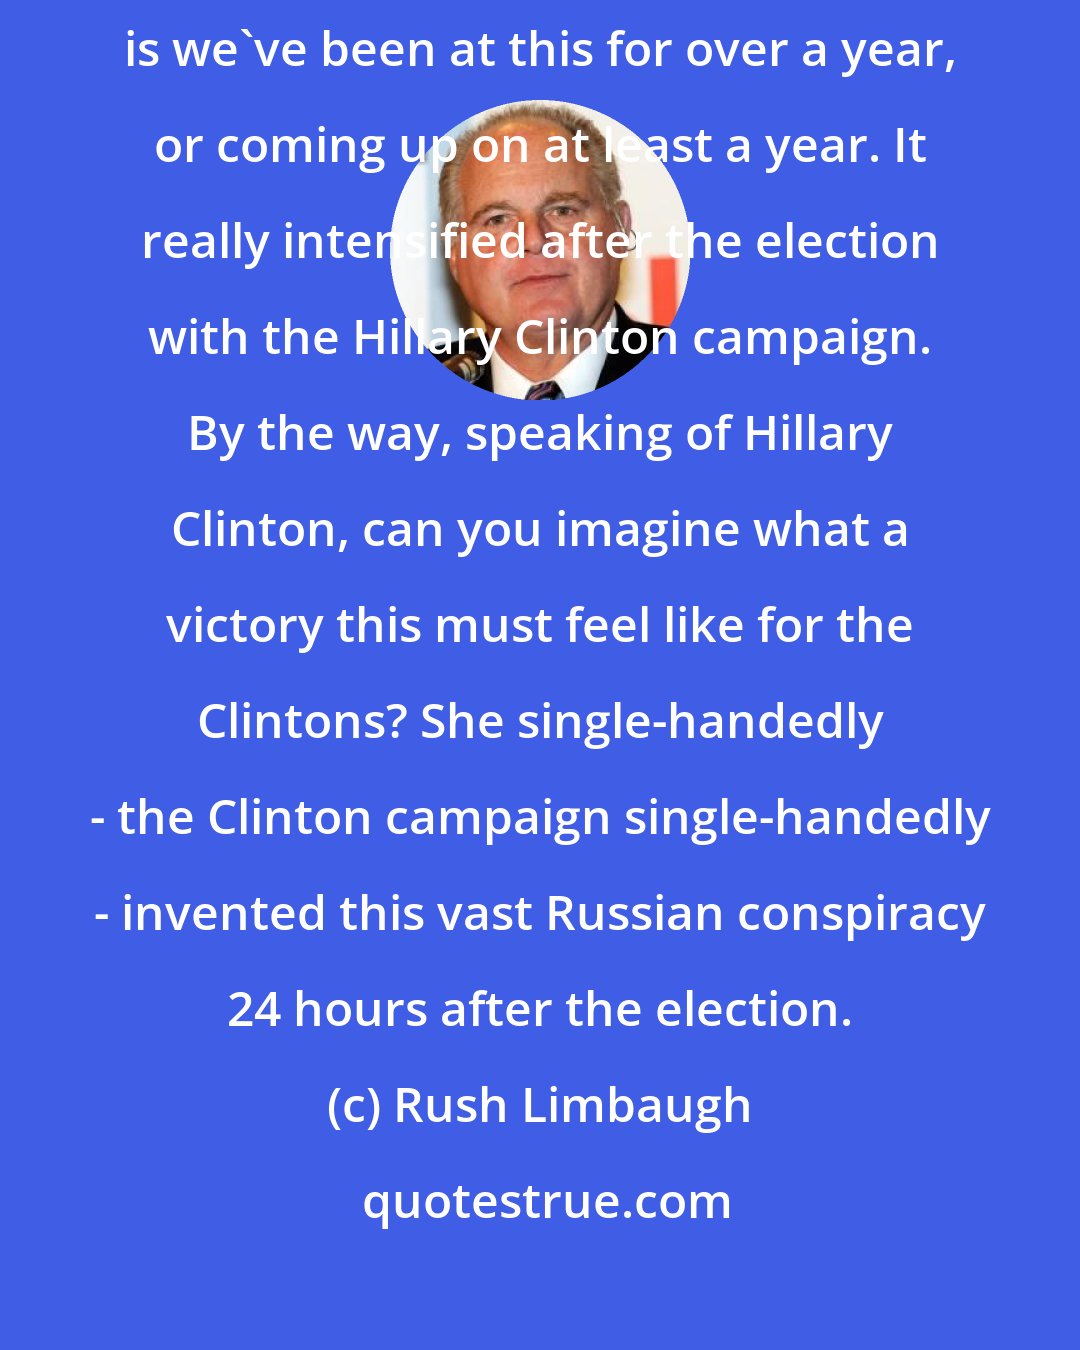 Rush Limbaugh: I think one of the things guiding this on the Russia-collusion side, is we've been at this for over a year, or coming up on at least a year. It really intensified after the election with the Hillary Clinton campaign. By the way, speaking of Hillary Clinton, can you imagine what a victory this must feel like for the Clintons? She single-handedly - the Clinton campaign single-handedly - invented this vast Russian conspiracy 24 hours after the election.